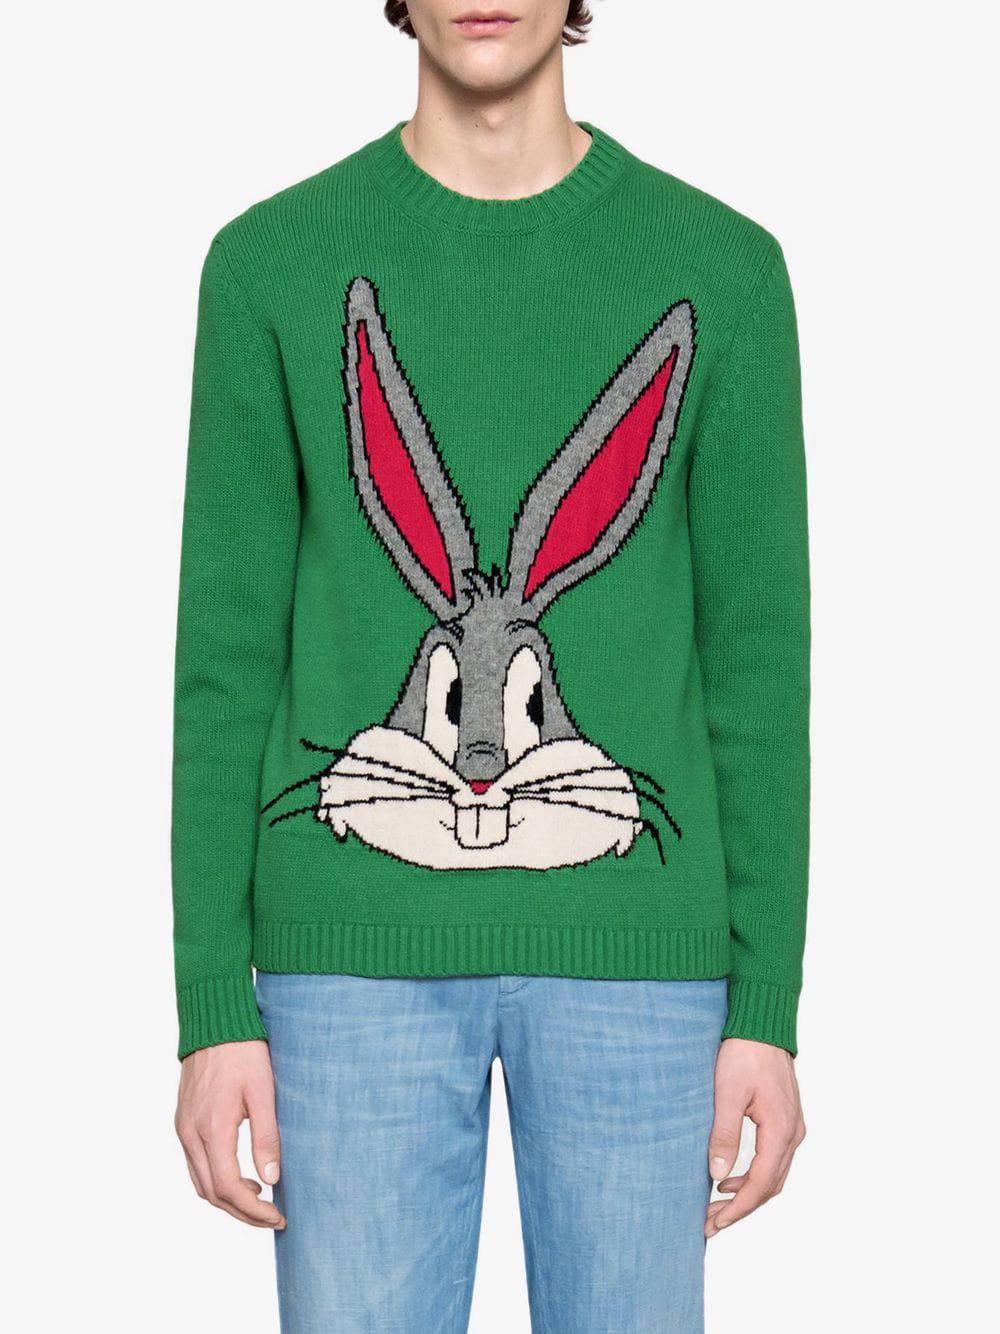 bugs bunny gucci sweater,Quality assurance,protein-burger.com